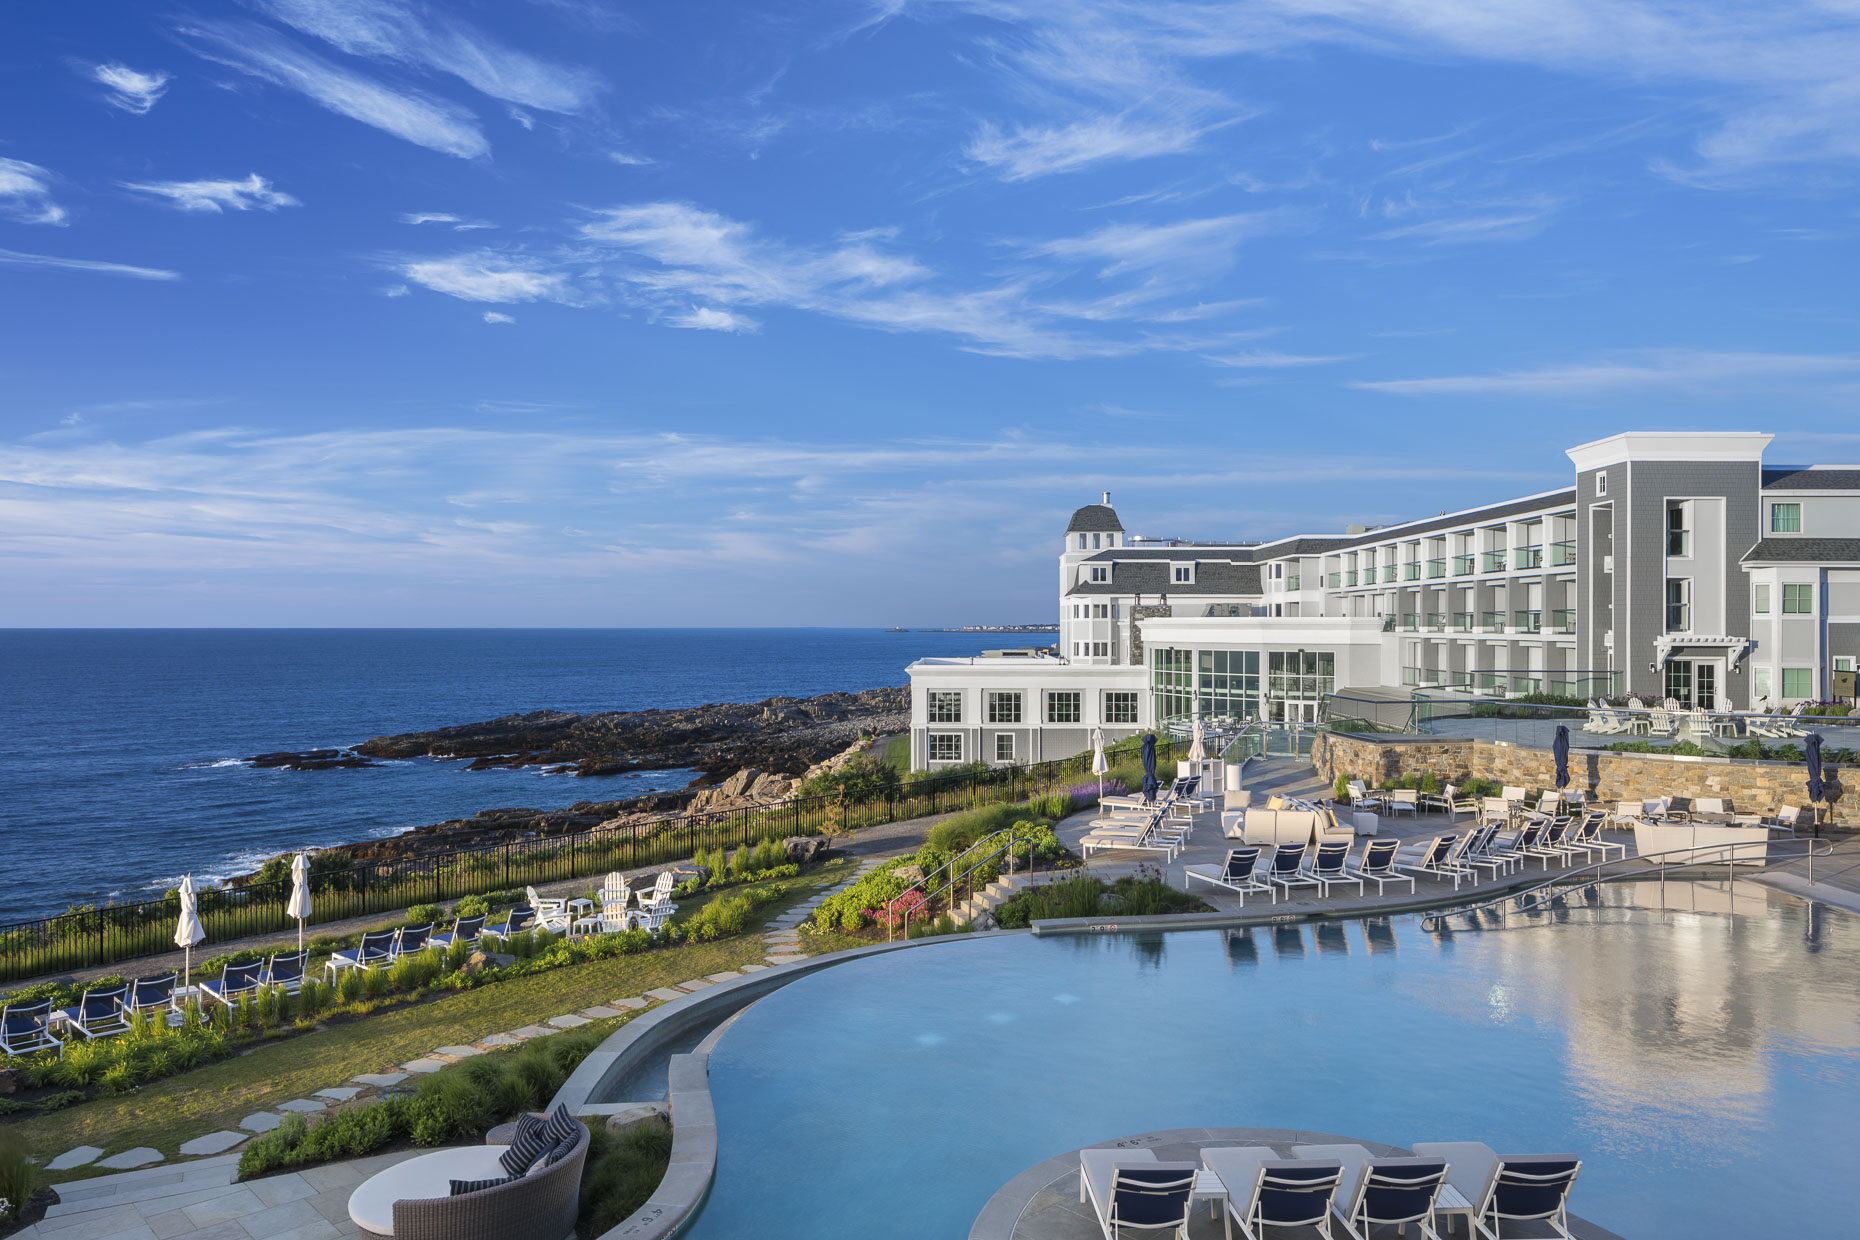 Cliff House Resort & Spa by Cooper Carry photographed by Brad Feinknopf based in Columbus, Ohio